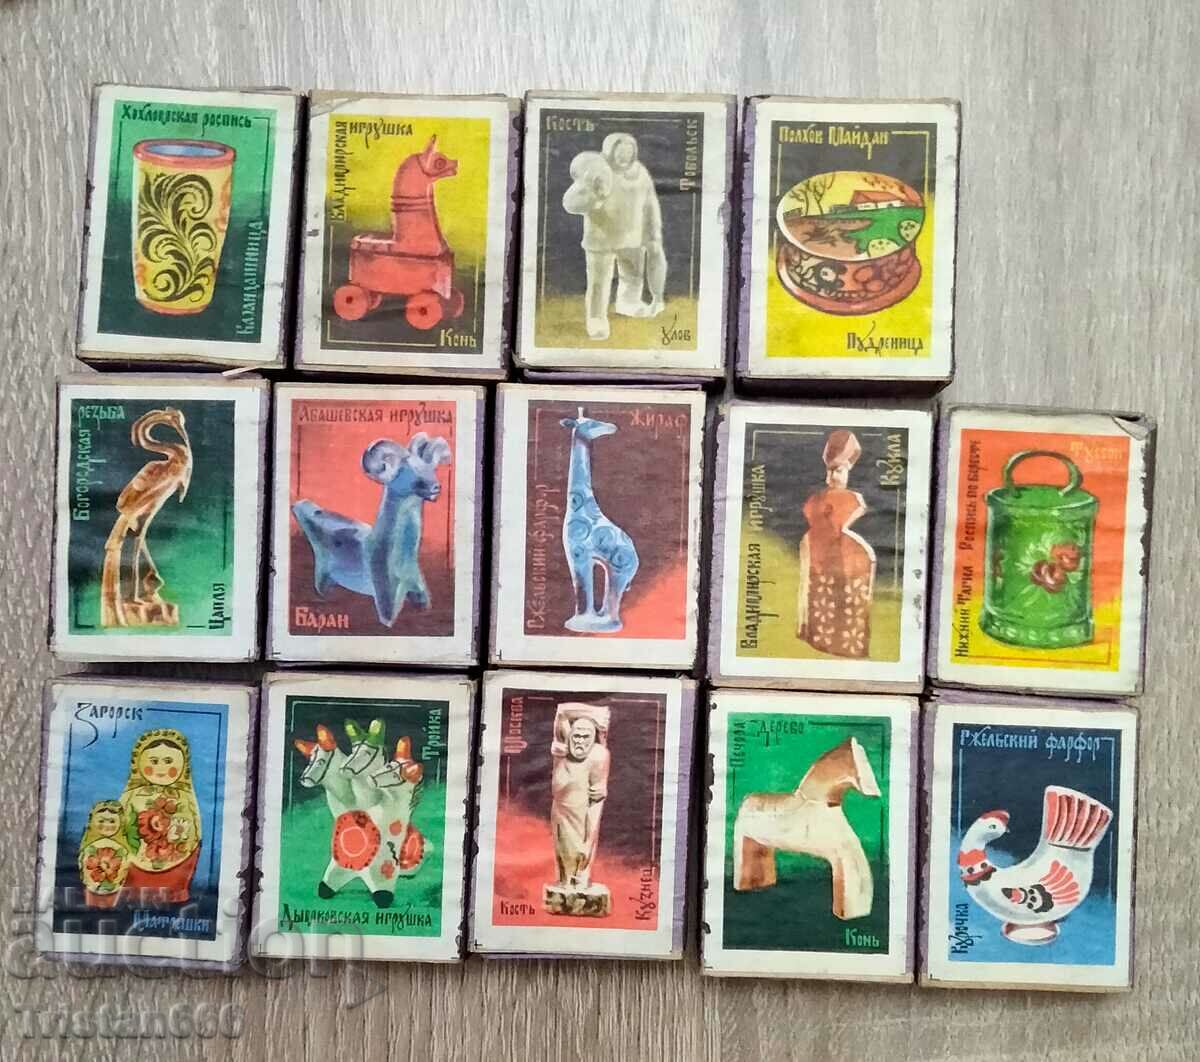 A series of matches